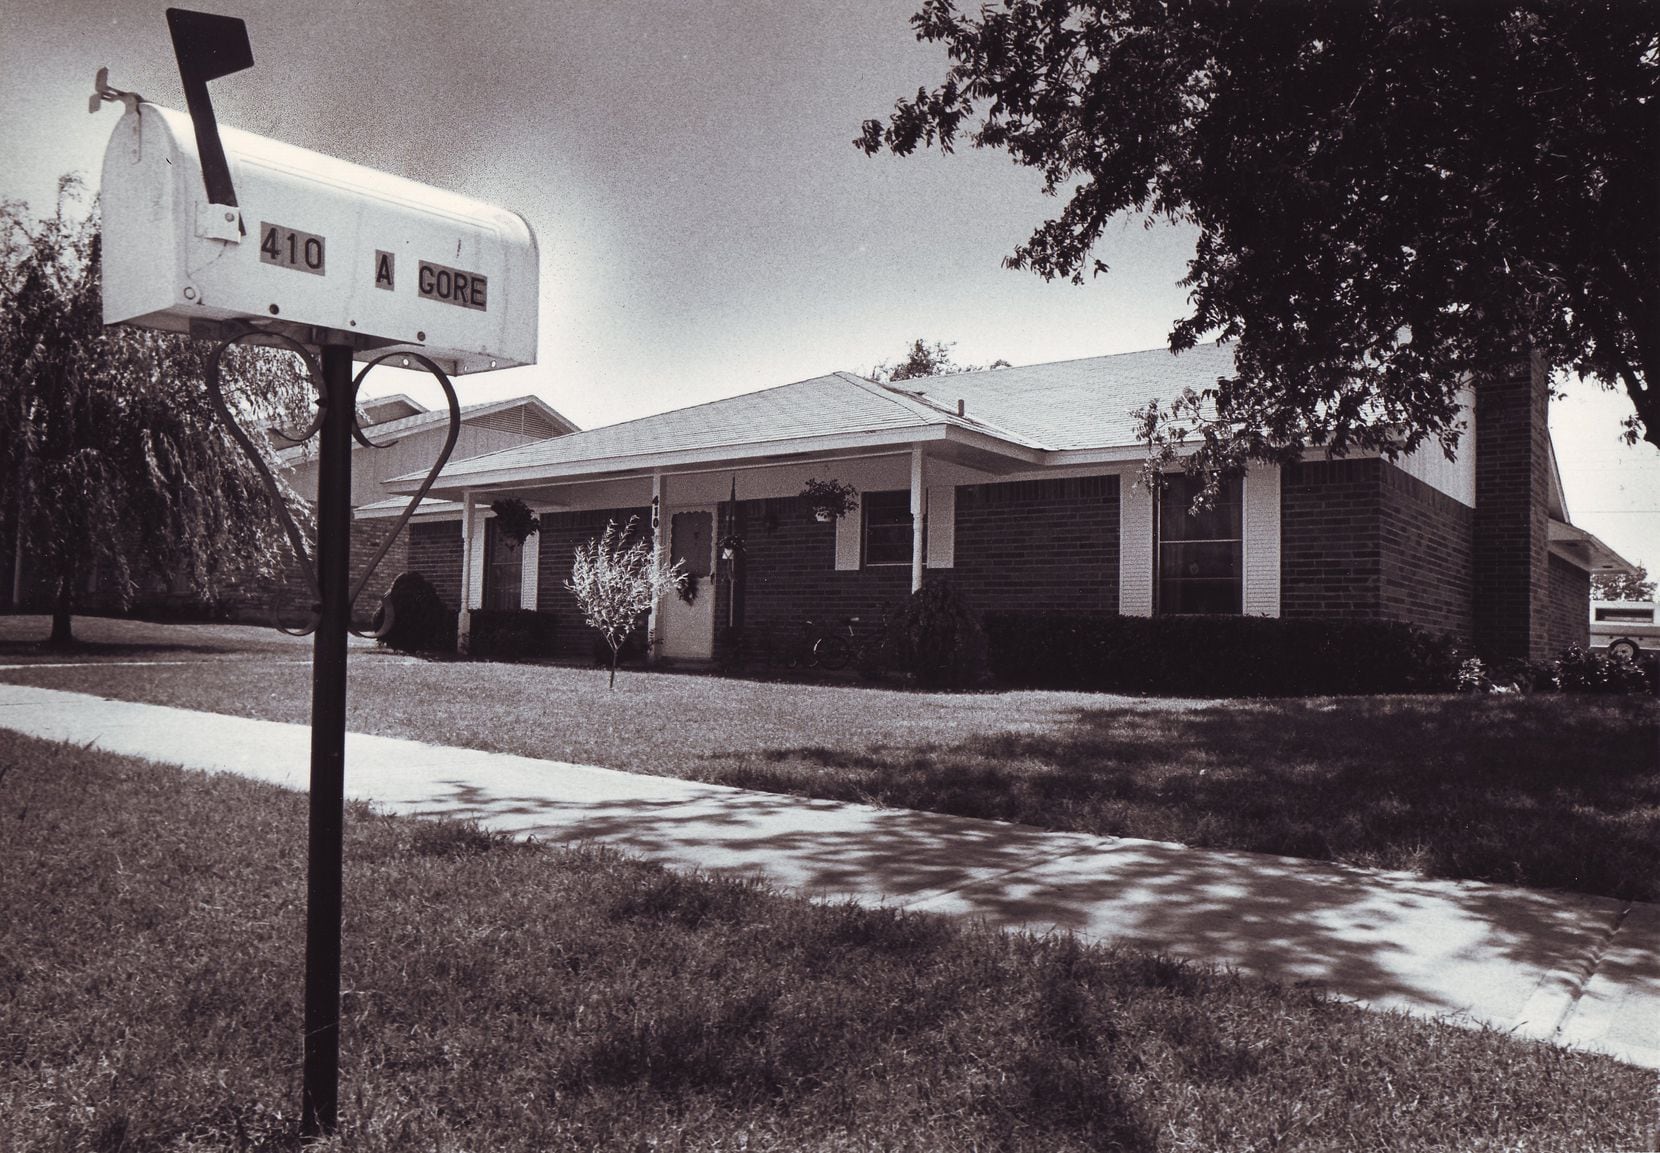 This 1980 file photograph shows the house in Wylie, Texas where Betty Gore was attacked and...